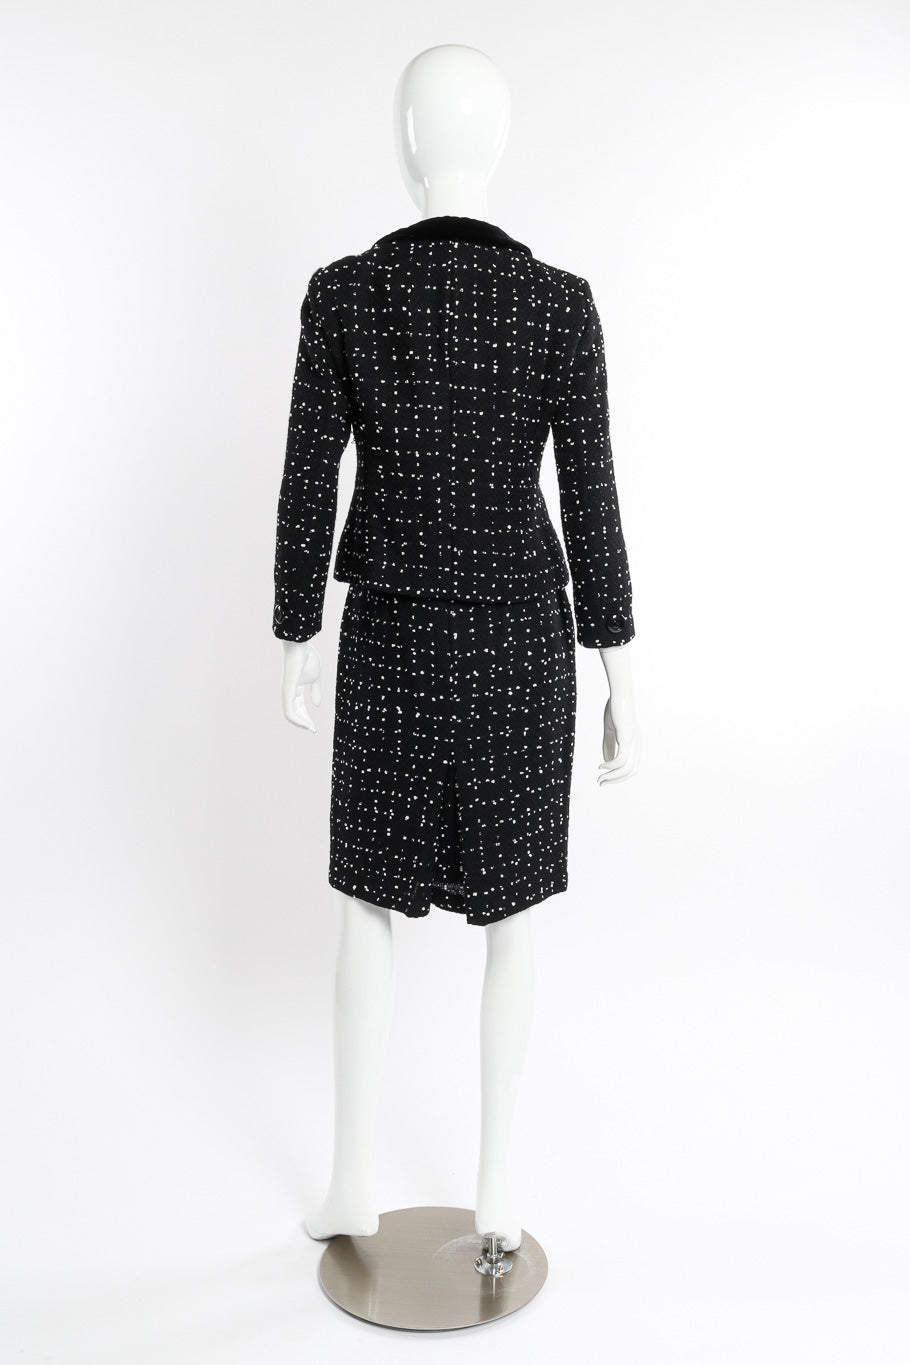 Vintage Moschino Dot Bouclé Jacket and Skirt Set back view on mannequin @recessla